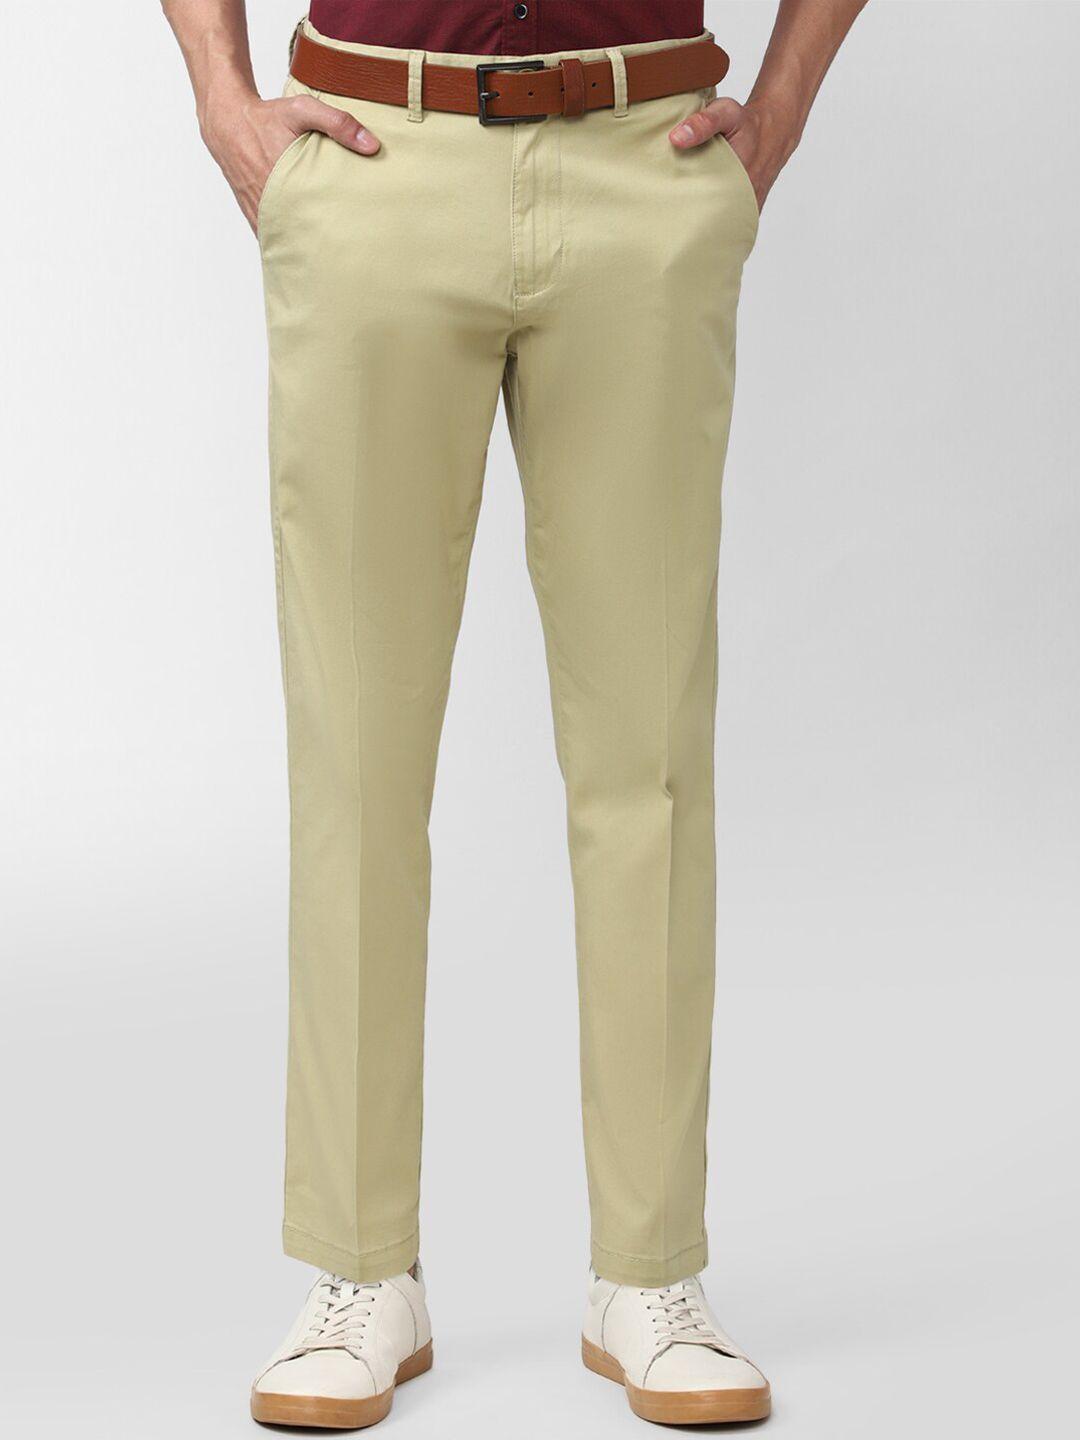 peter england casuals men yellow slim fit chinos trousers